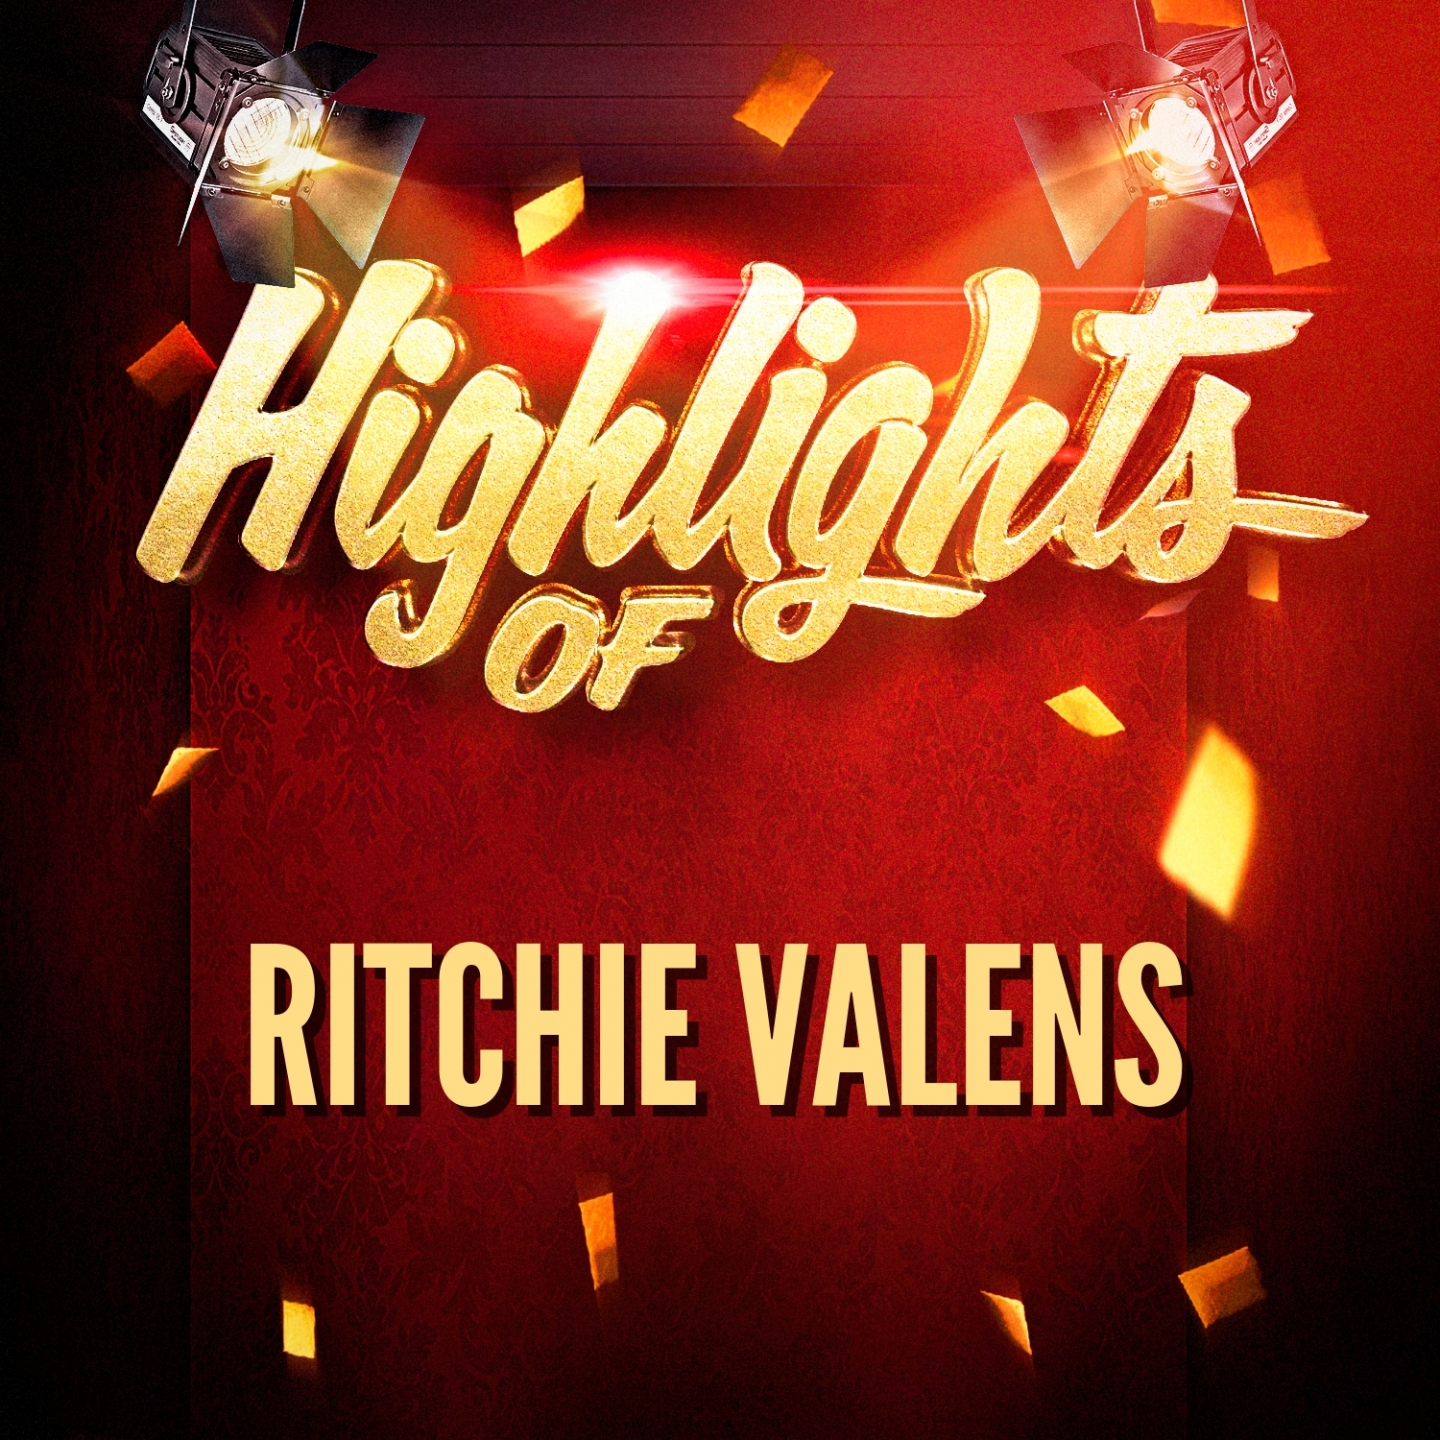 Highlights of Ritchie Valens